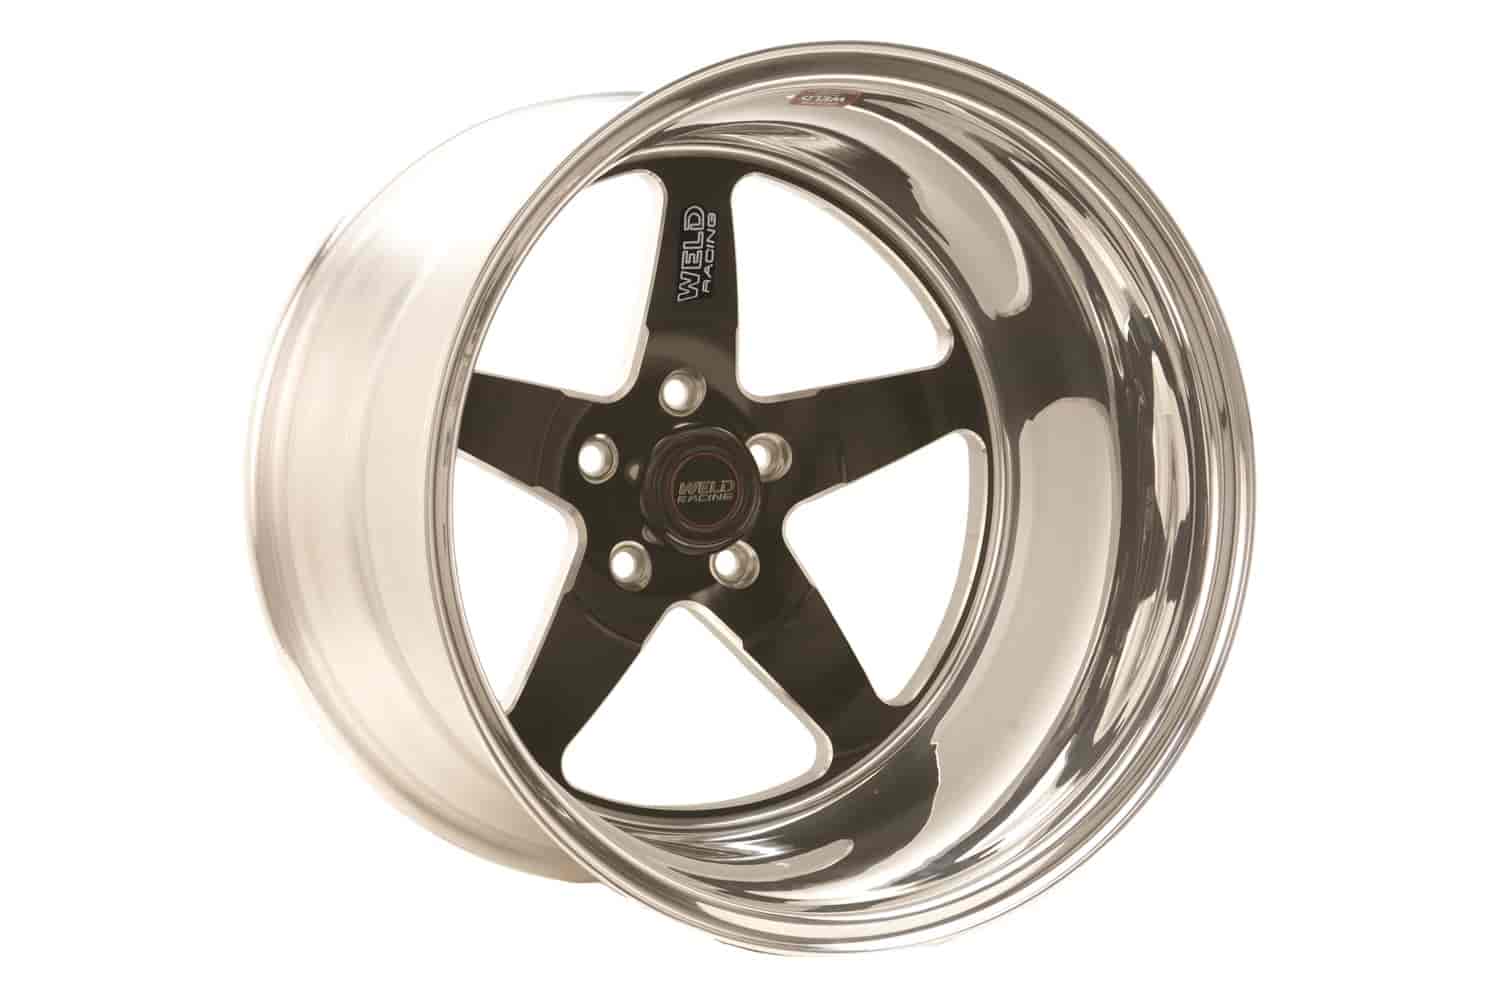 RT-S Series S71 Wheel Size: 15" x 5" Bolt Circle: 5 x 4-1/2" Back Space: 3-1/2"